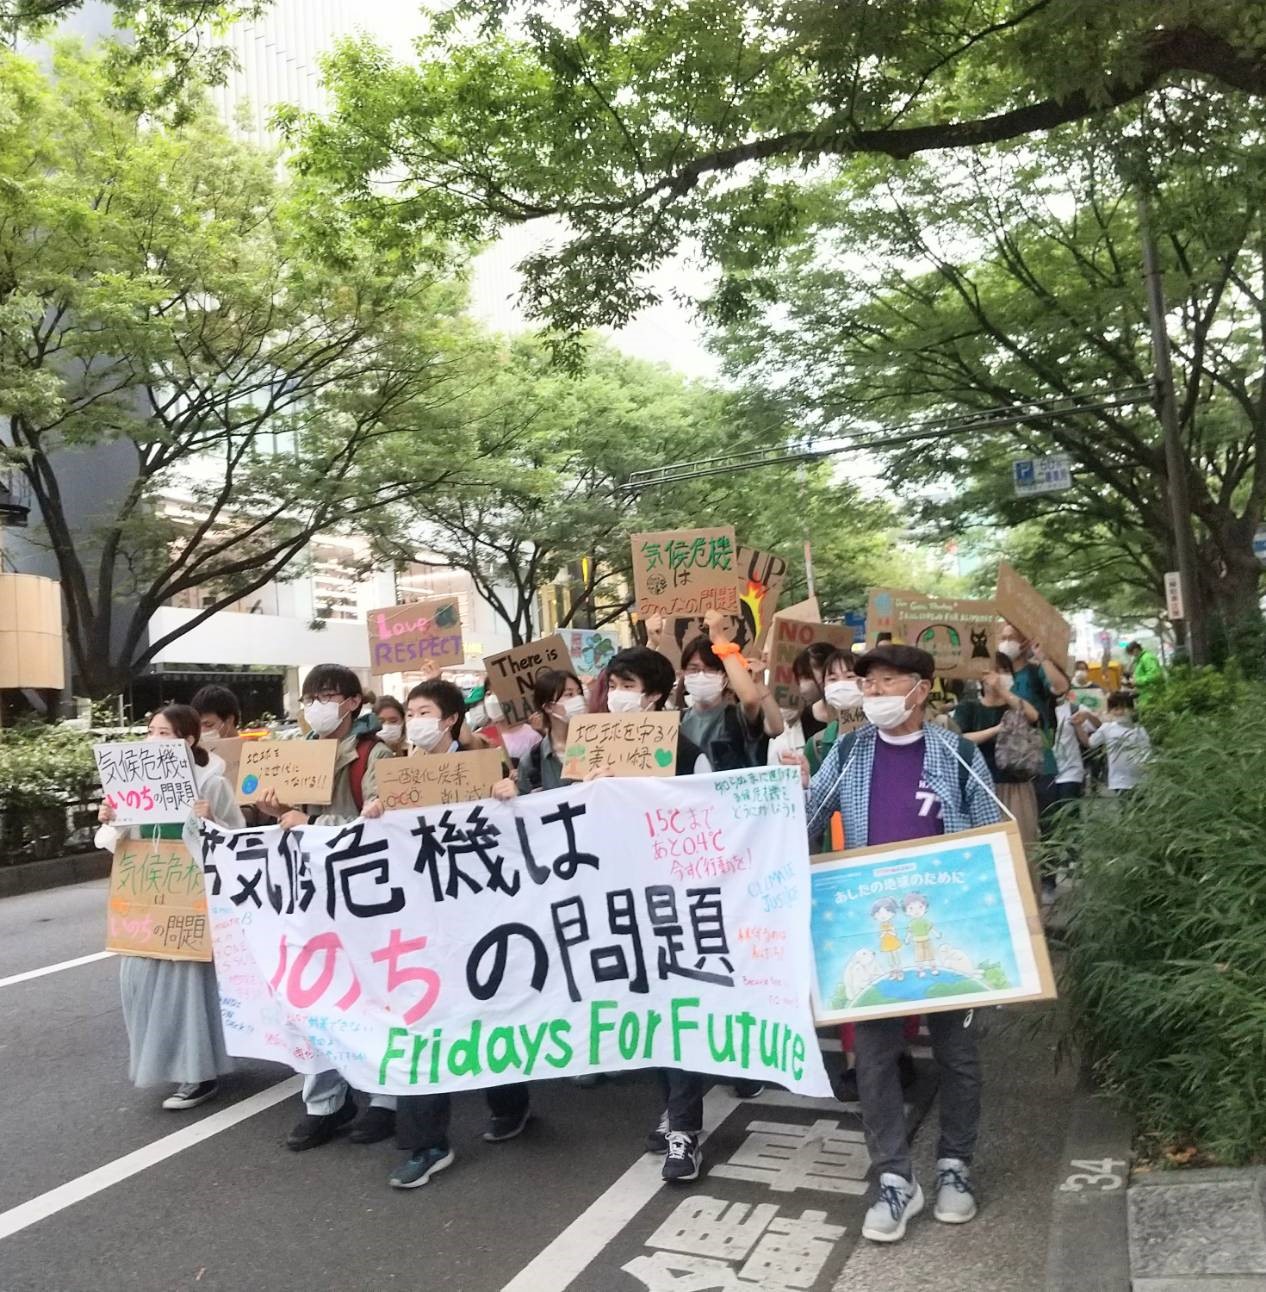 【News】Climate actions held nationwide in Japan on September 23